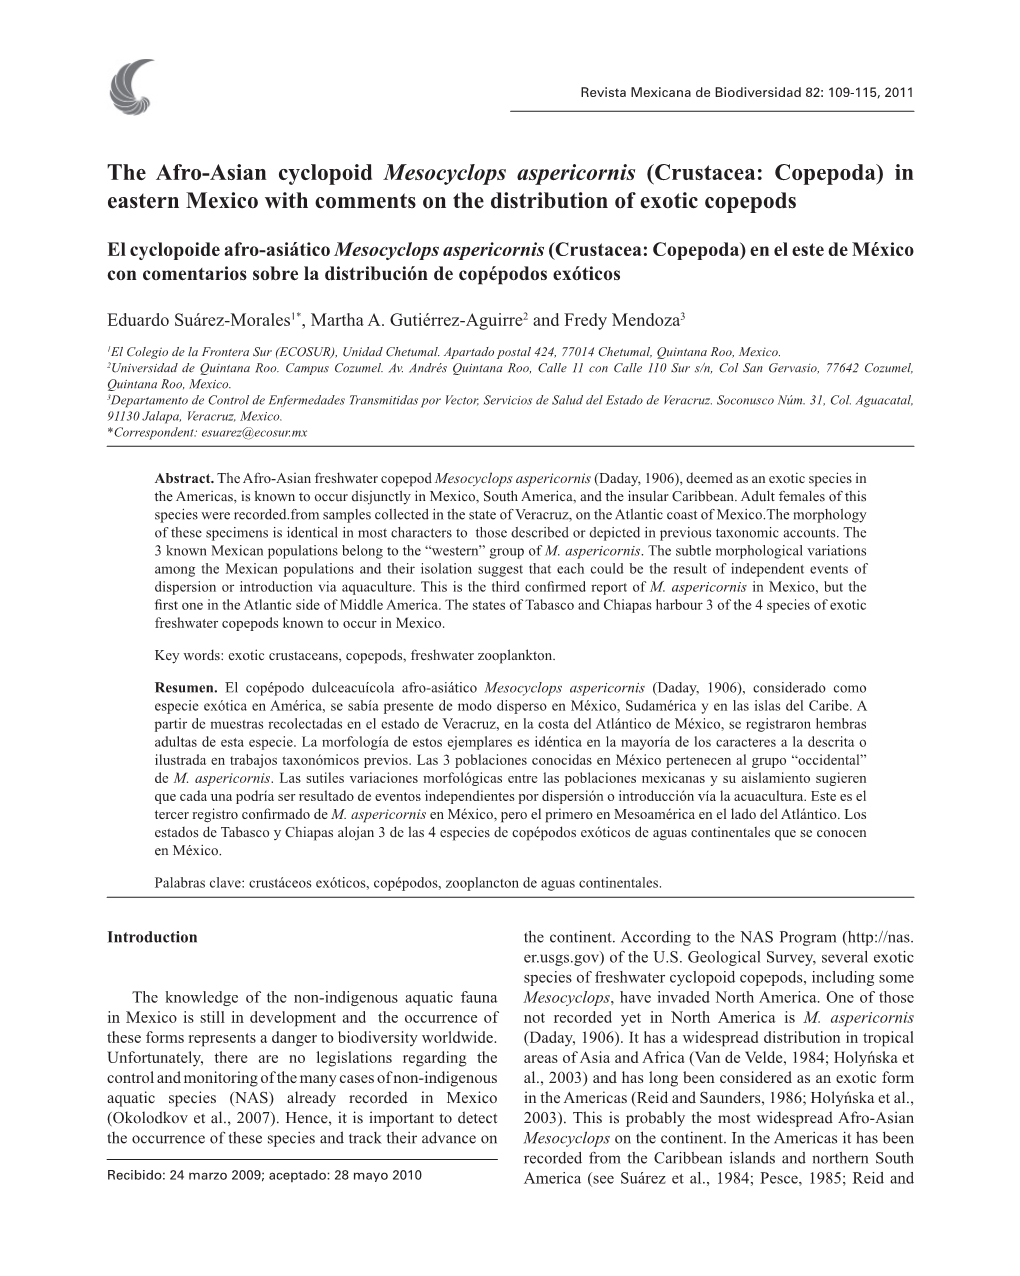 The Afro-Asian Cyclopoid Mesocyclops Aspericornis (Crustacea: Copepoda) in Eastern Mexico with Comments on the Distribution of Exotic Copepods